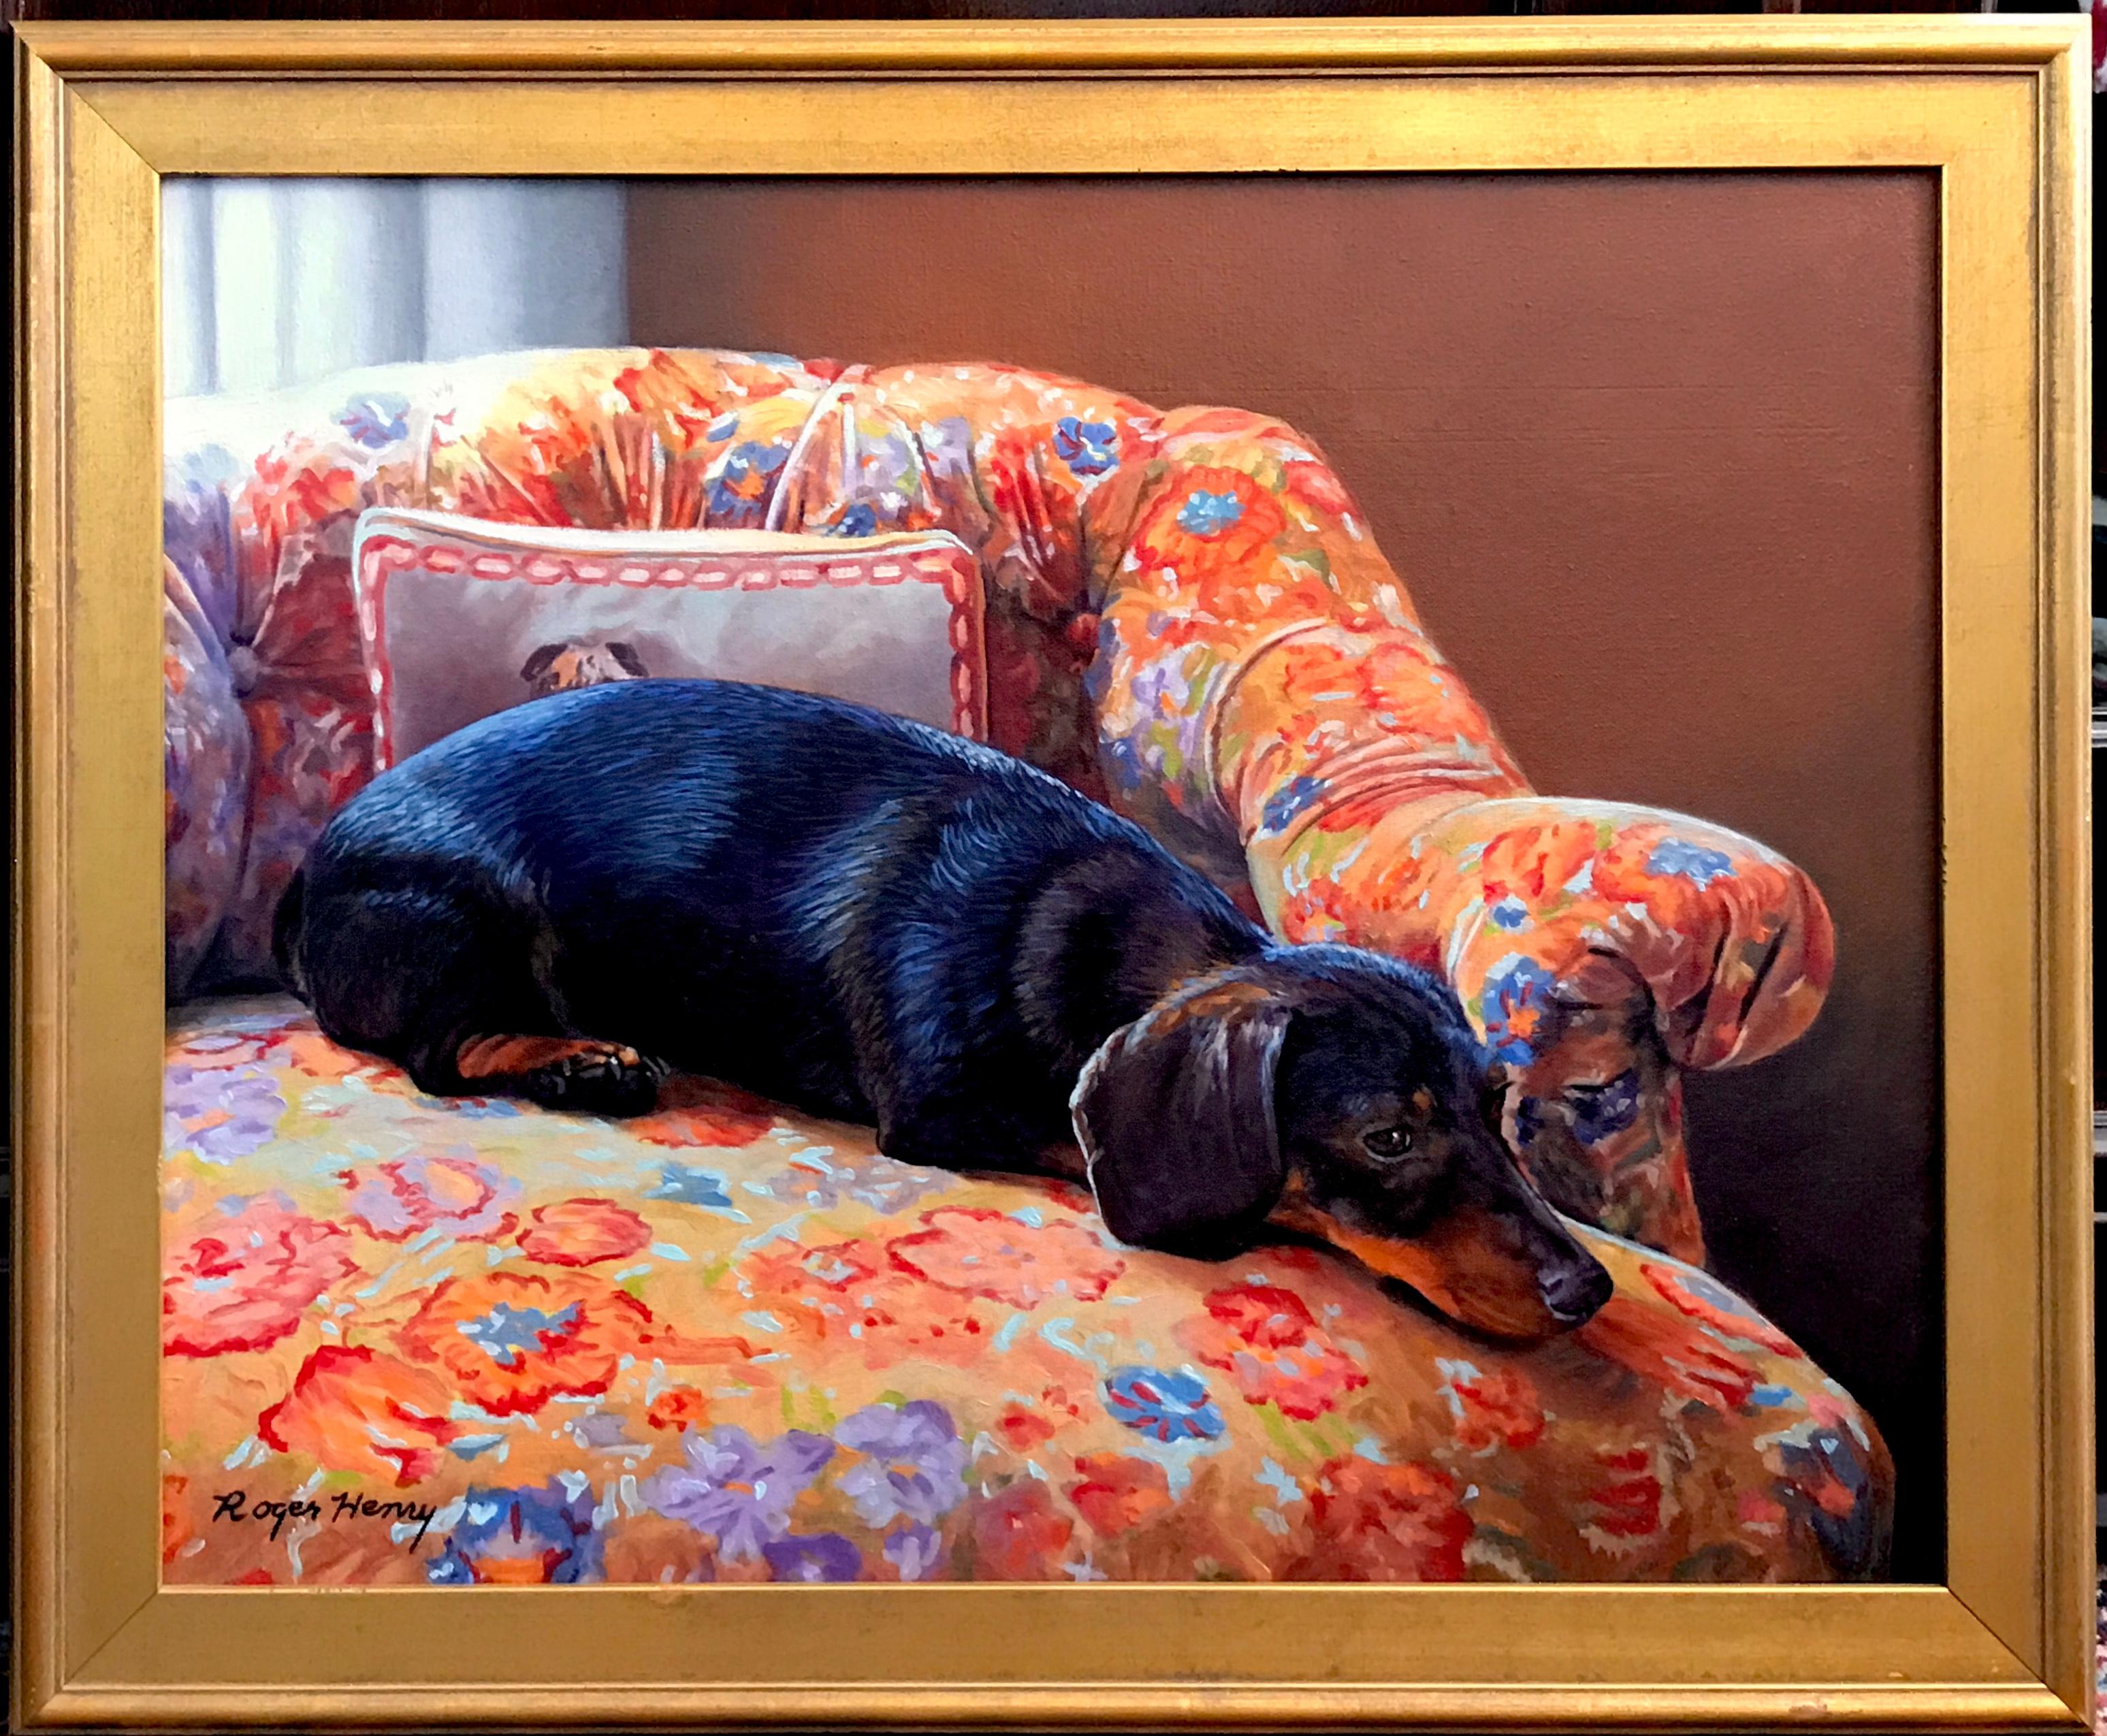 Vivid Dachshund realist painting on blue and yellow chair by animal portraitist - Realist Painting by Roger Henry